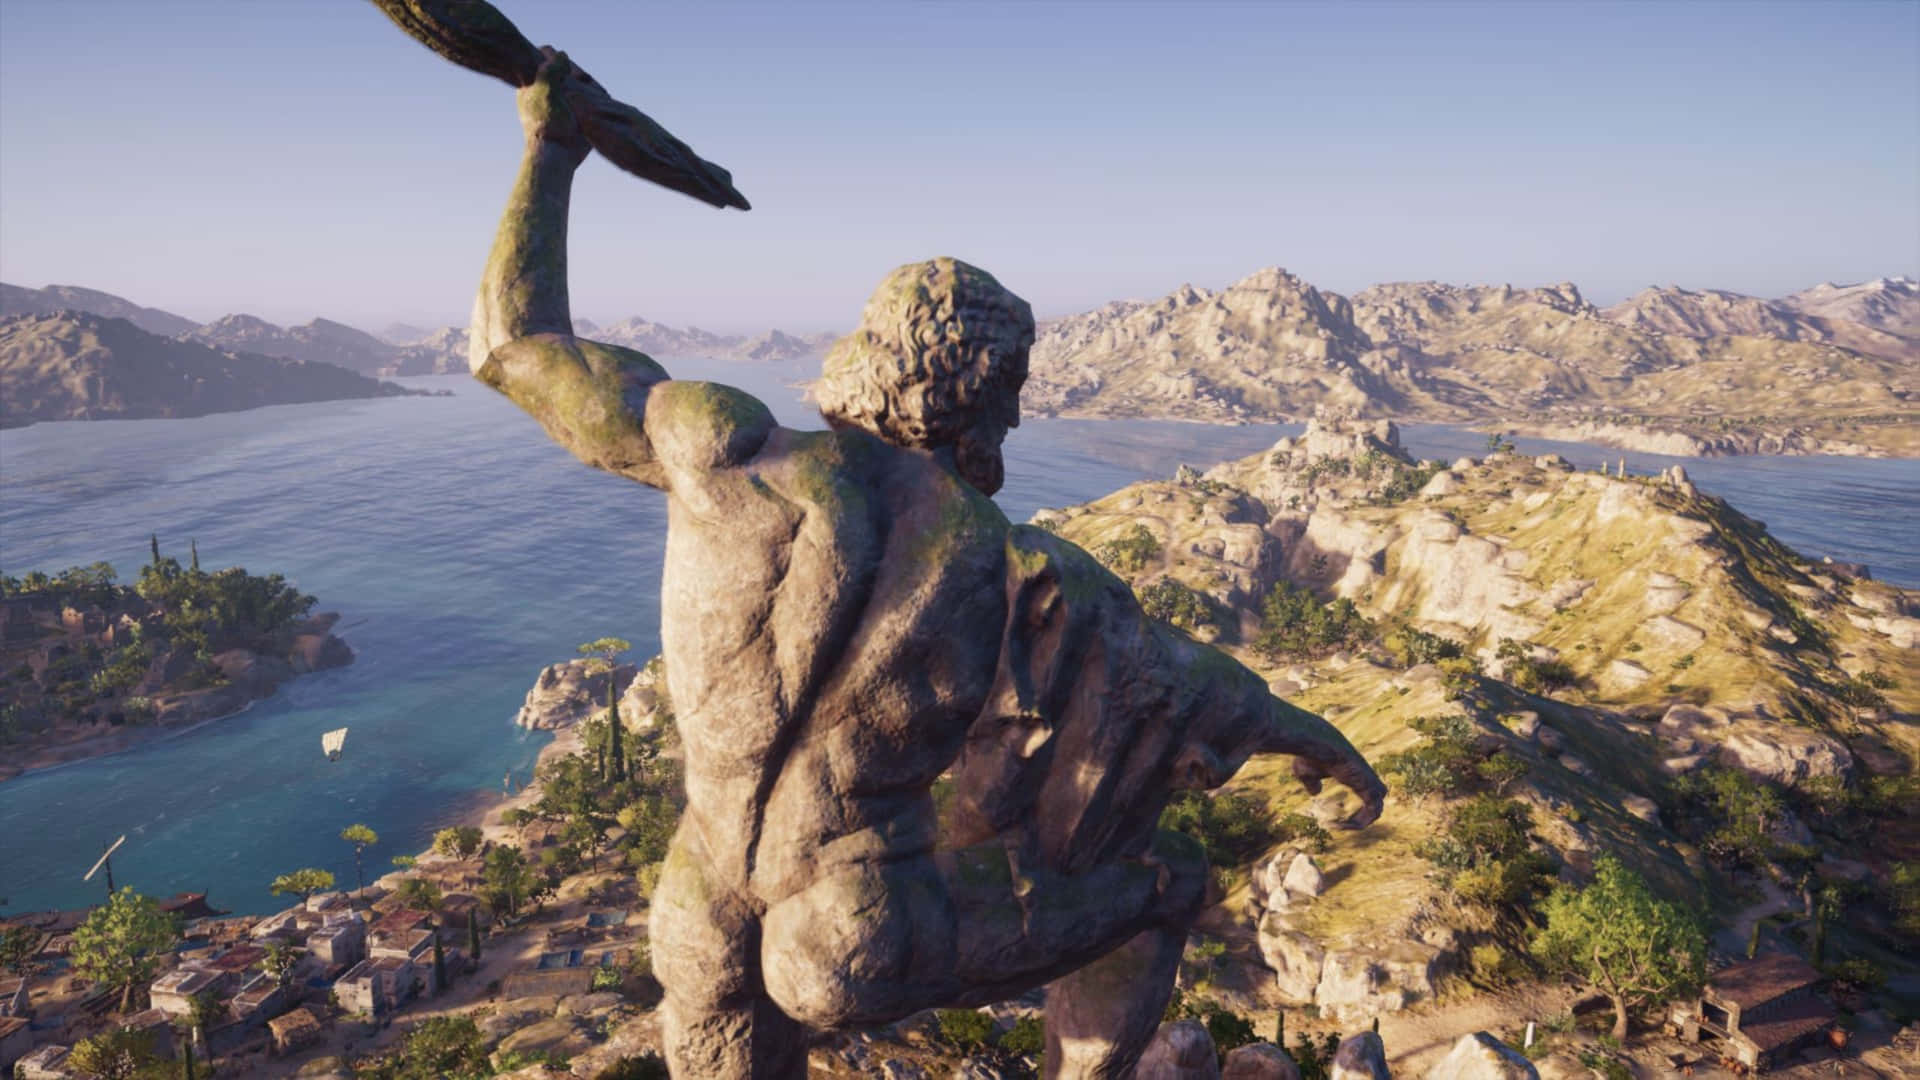 Zues Statue 1440p Assassin's Creed Odyssey Background